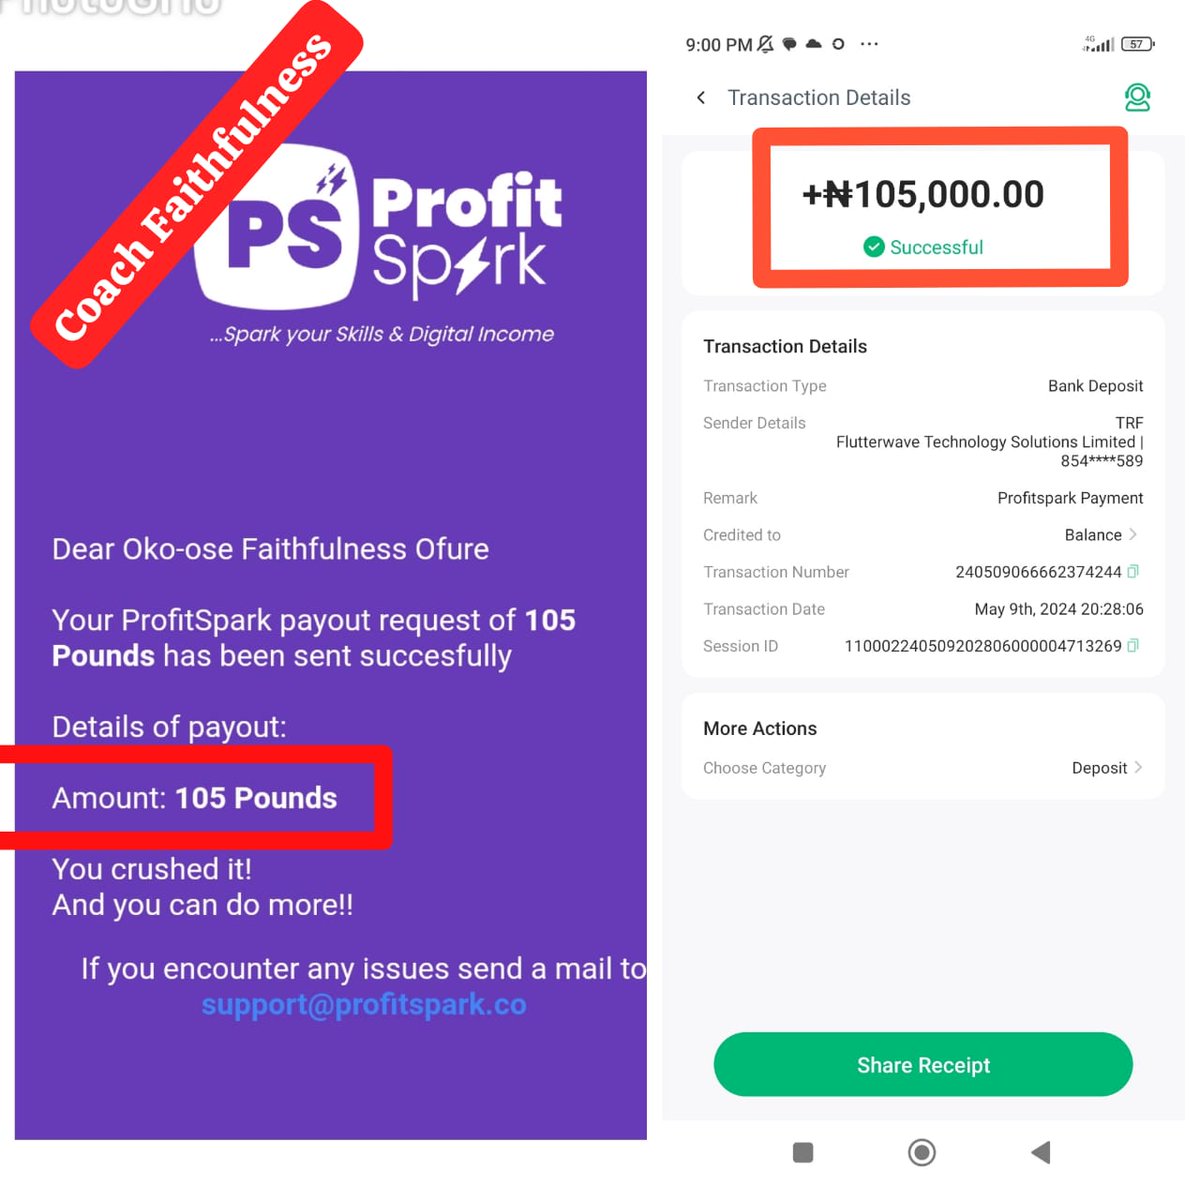 My journey with @profitsparkco just got started on a very good note👍

First payment received successfully ✅ A whooping sum of 105k added to the bag💰
 
No doubt better days are here already 🥂😊
... Let's do more 💰💰
#AffiliateMarketing #makemoneyonline